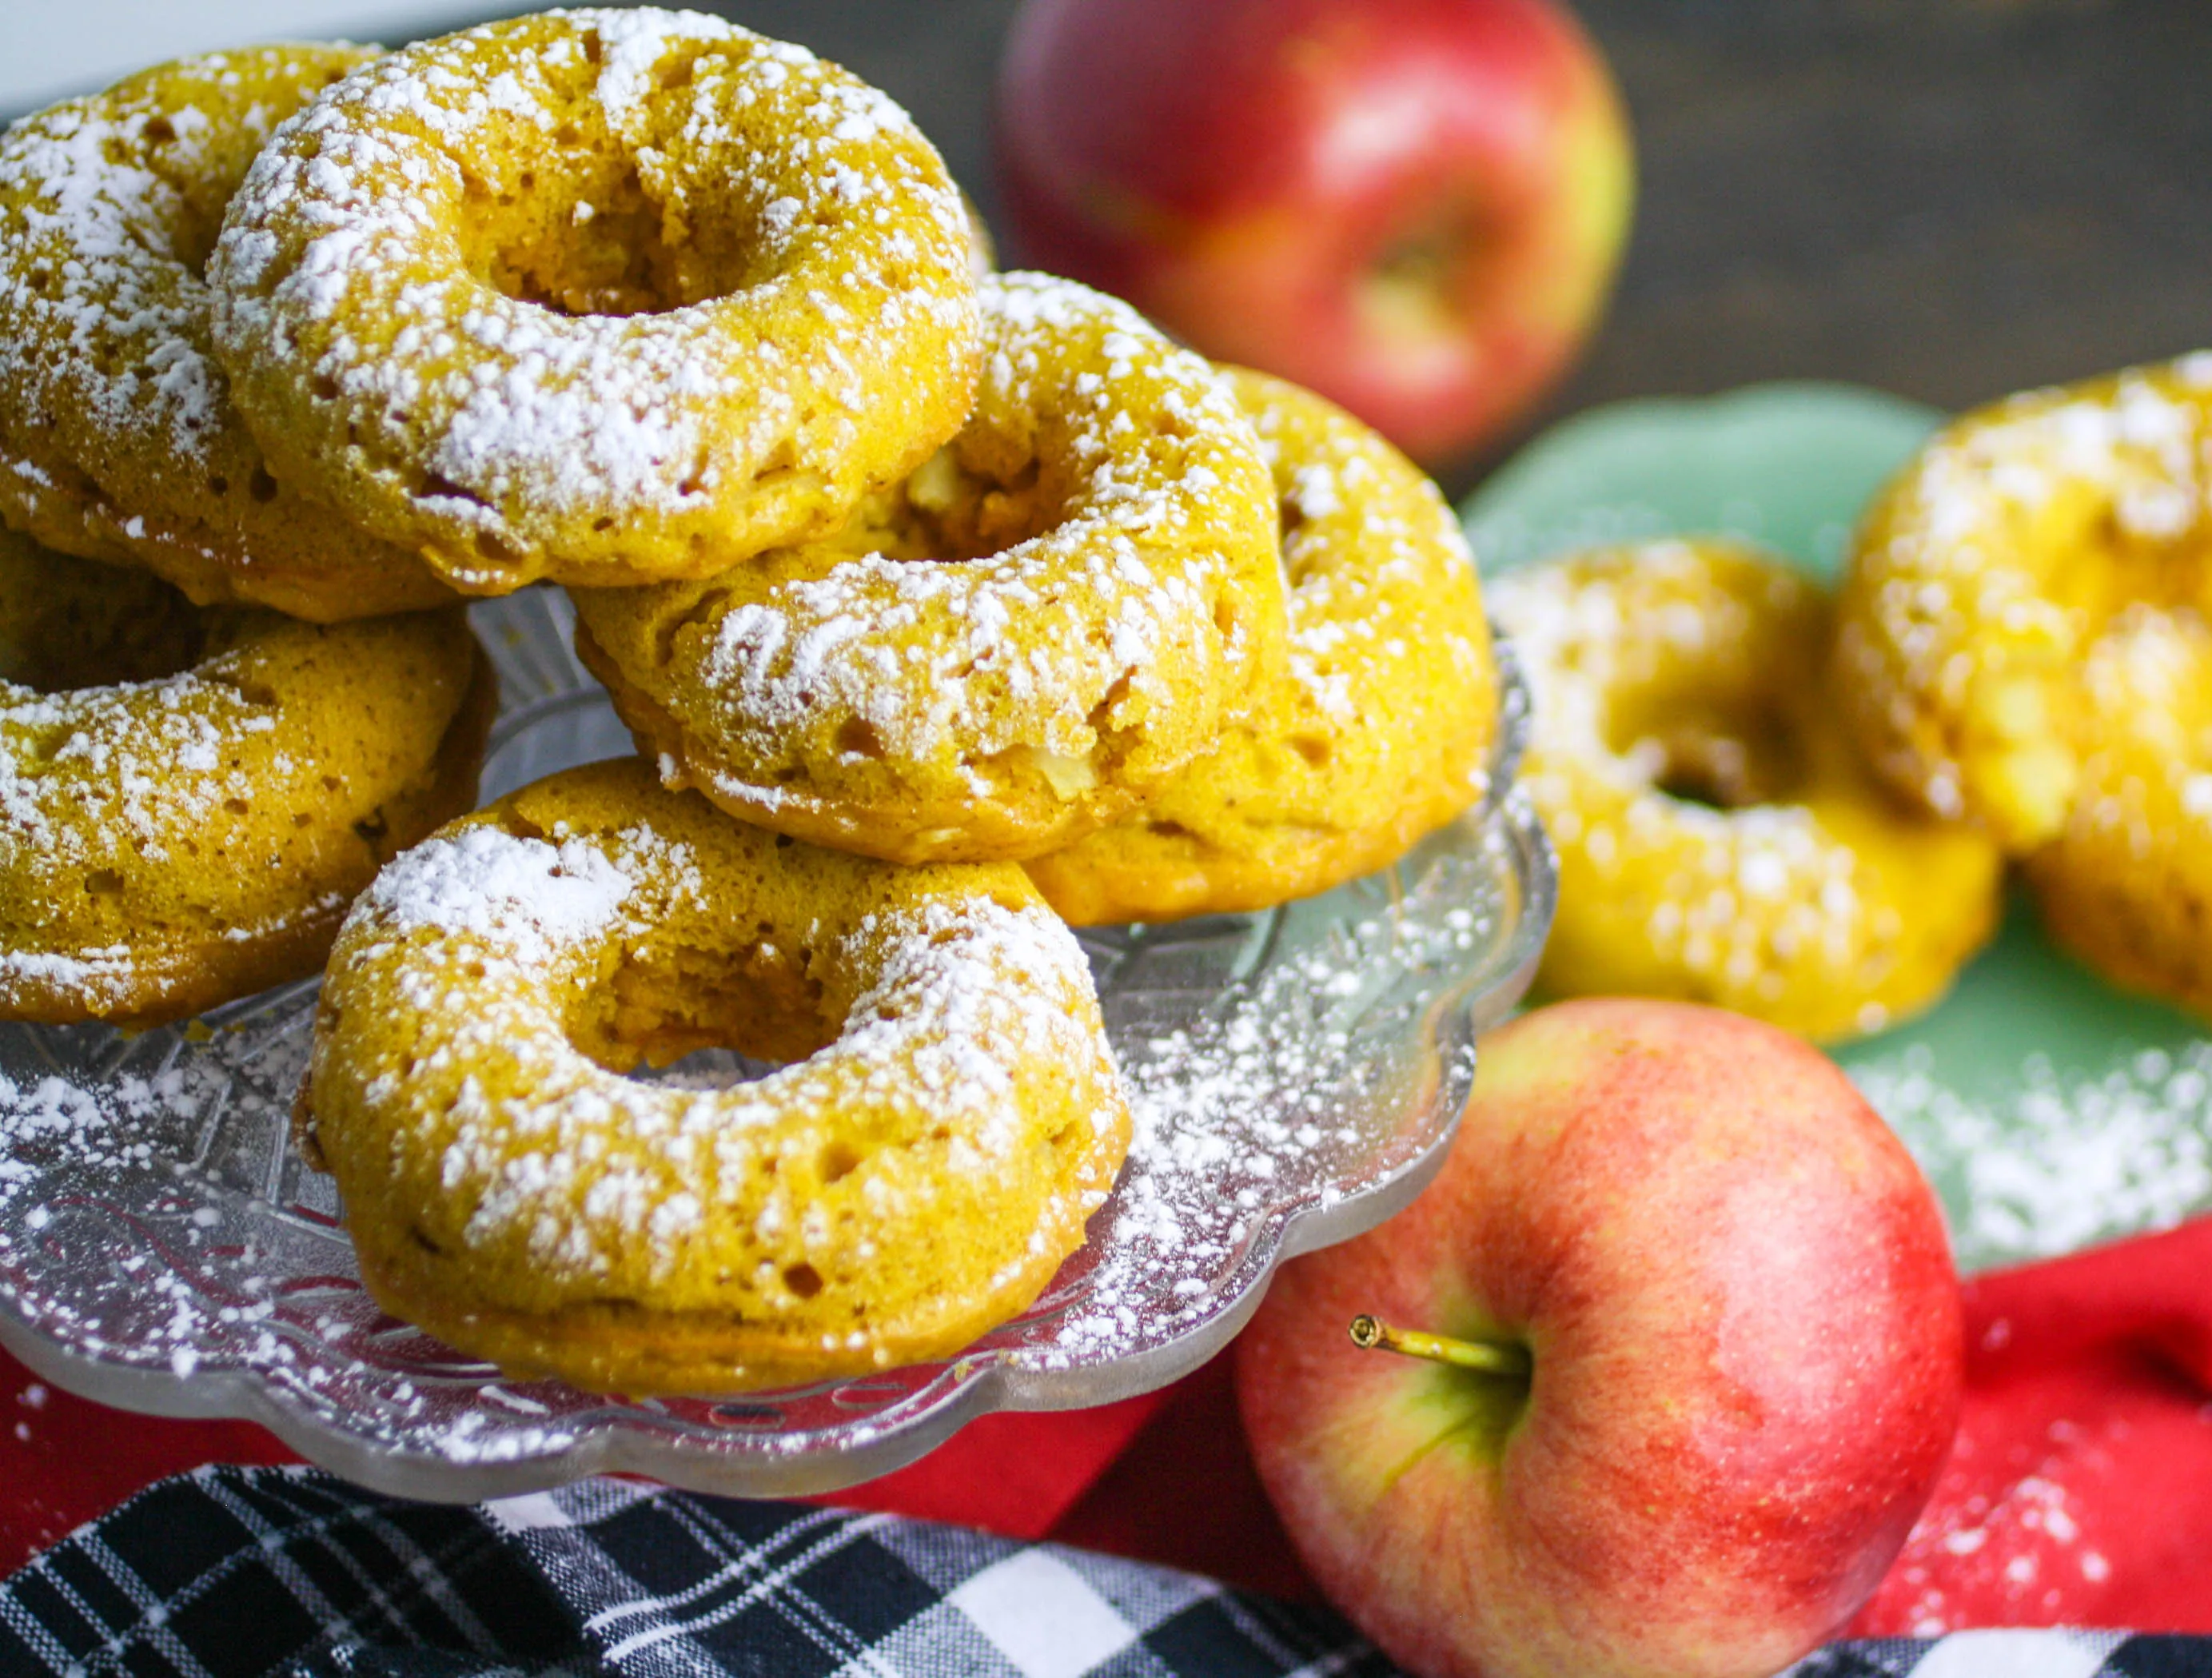 You need Baked Spiced Apple & Pumpkin Donuts in your life! These Baked Spiced Apple & Pumpkin Donuts are a seasonal treat!